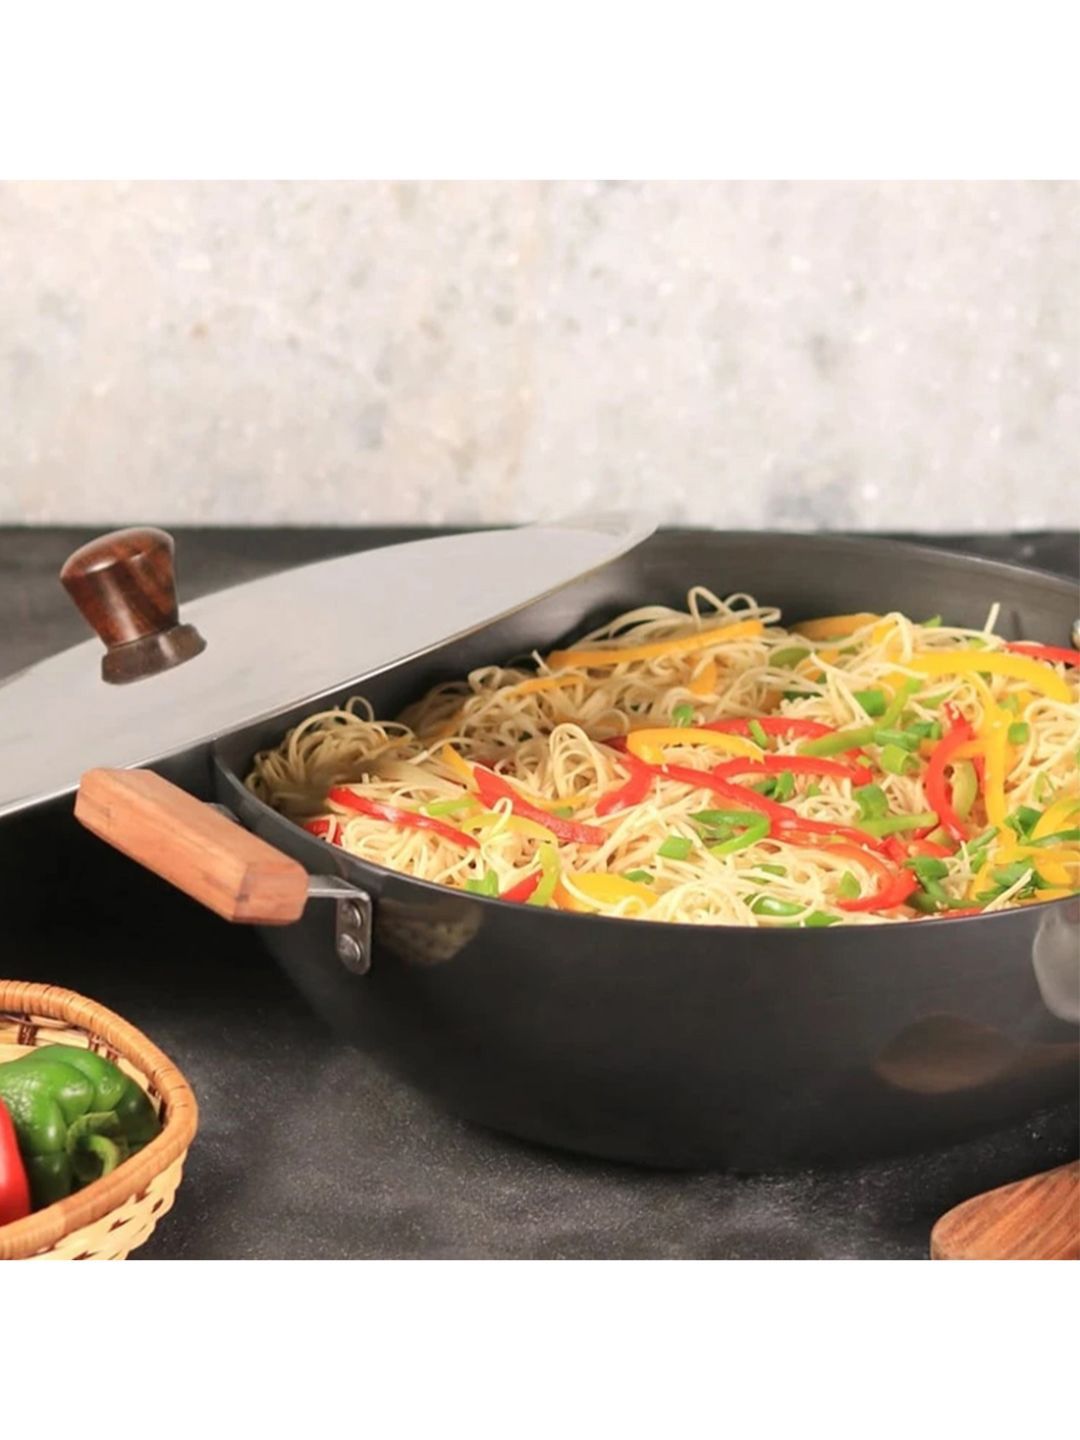 Wonderchef Black Solid Ebony Hard Anodized Wok With Lid Cookware Set Price in India